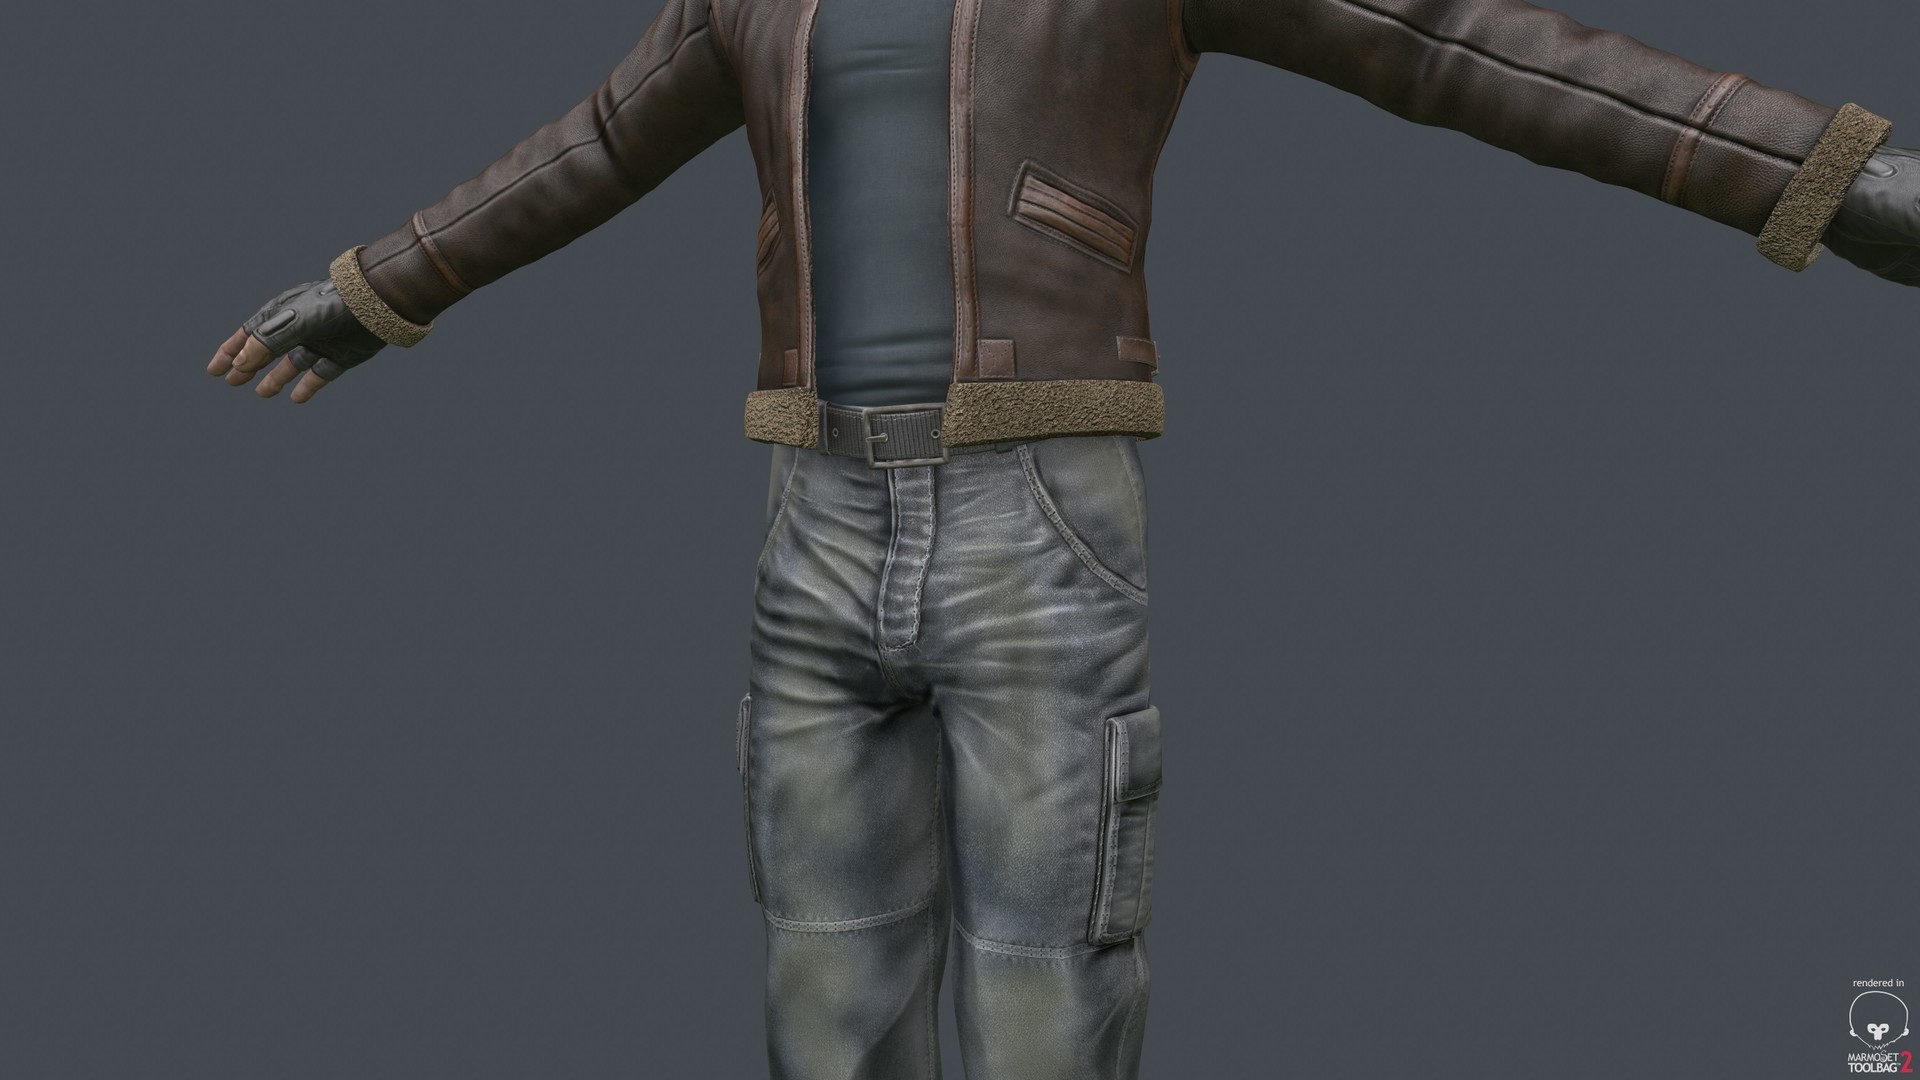 Leon S Kennedy Outfit from RE4.